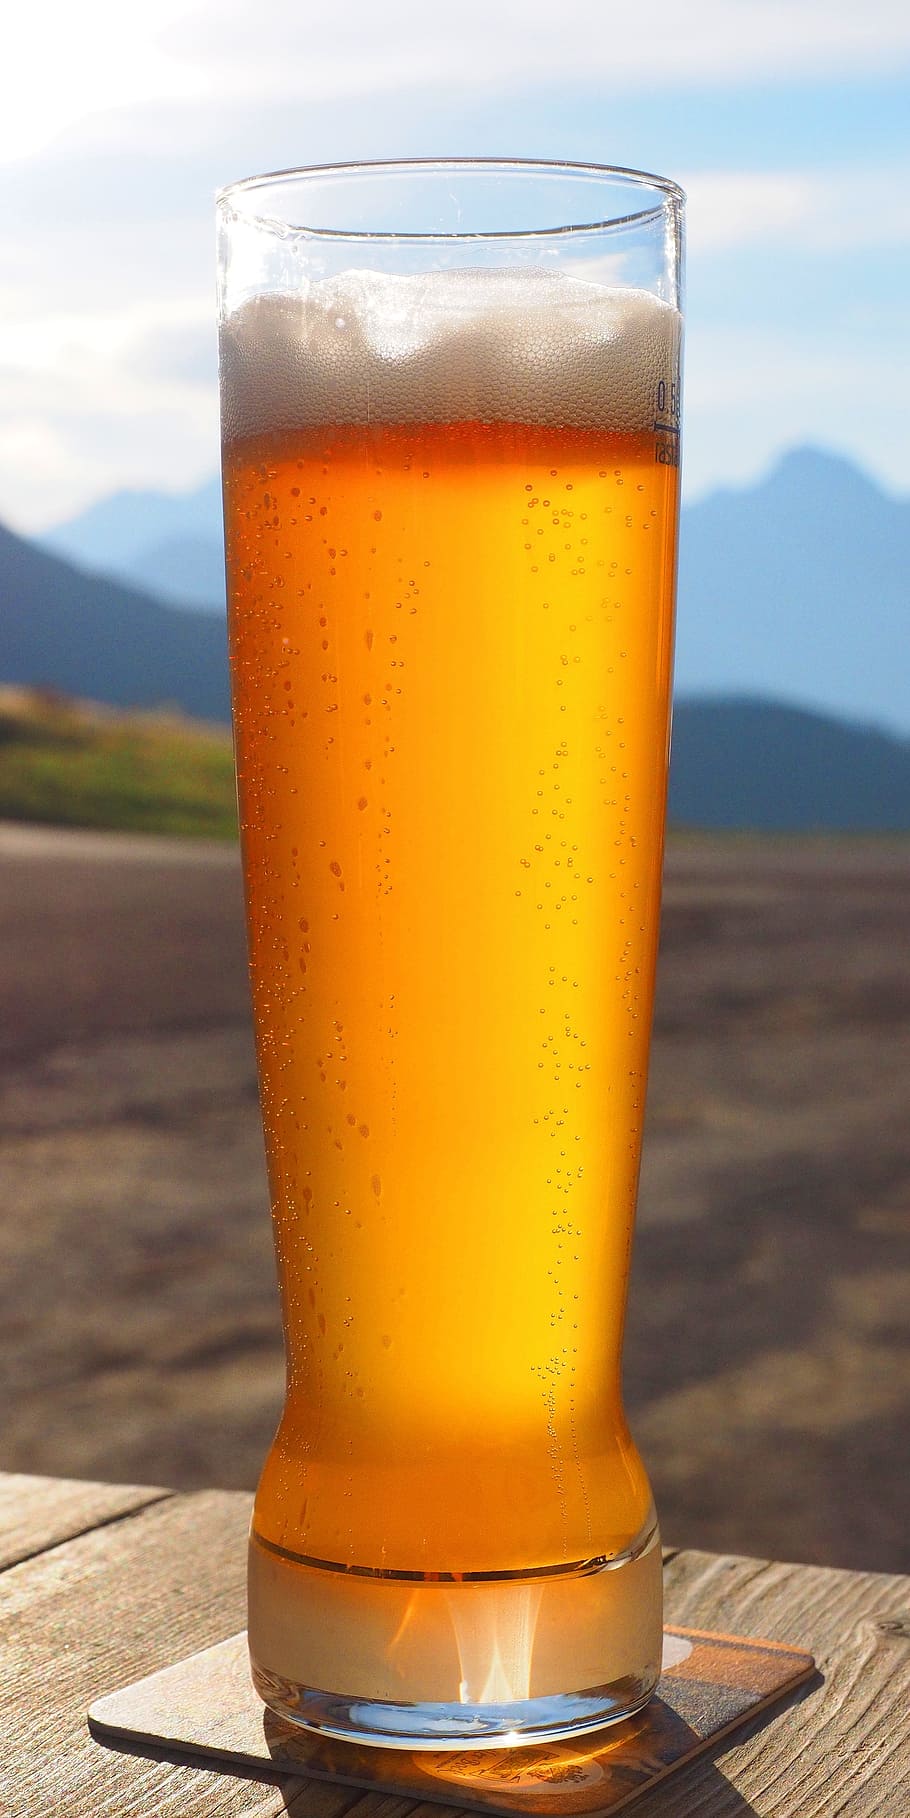 closeup, glass, filled, beer, table, wheat beer, beer glass, wheat beer glass, drink, thirst quencher